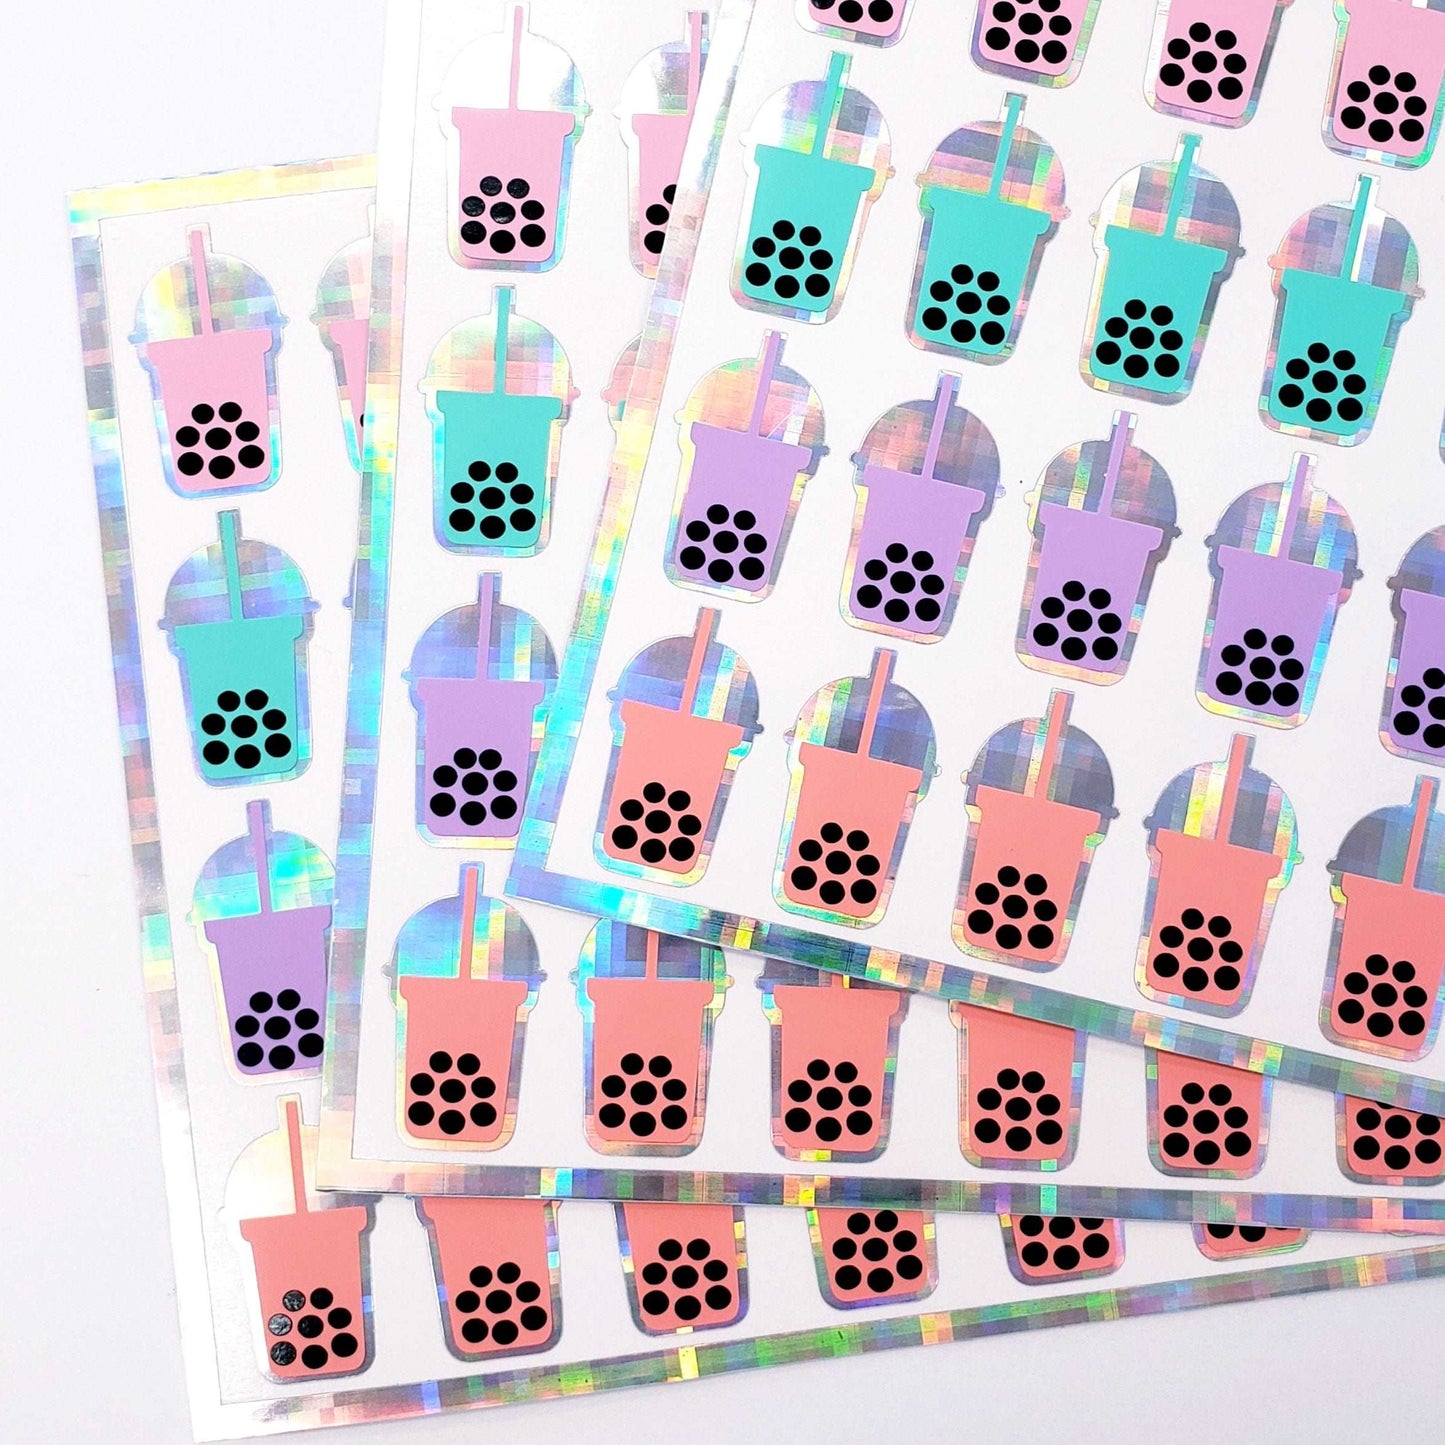 Boba Tea Stickers, set of 36 cute cold drink holographic stickers for calendars, journals, and planners. Bubble tea lover gift. Pastels